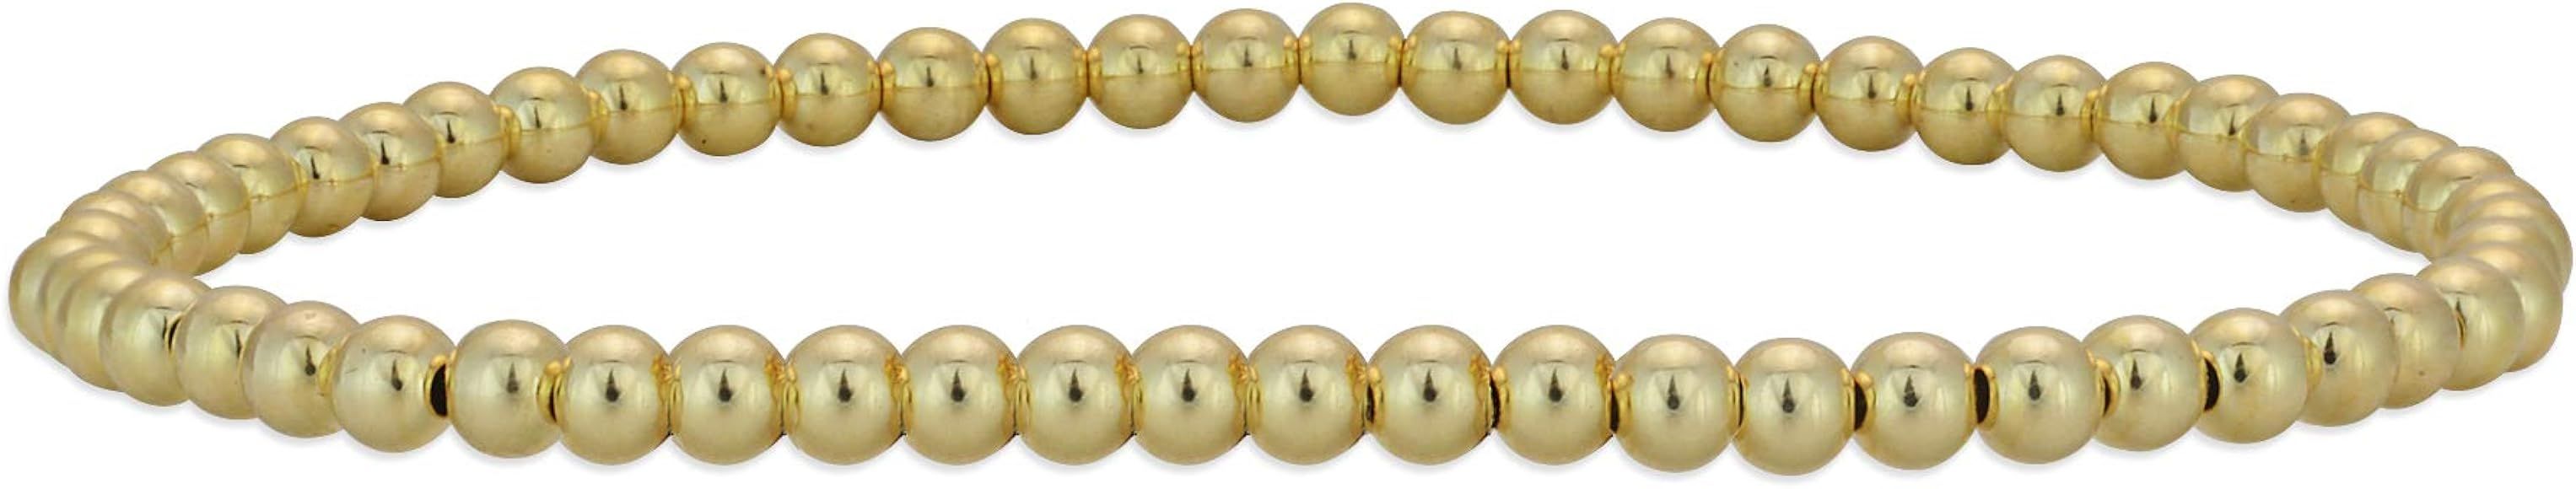 Anela 14kt Gold Filled Bracelet, 3mm Beads, Stretch and Stackable, Hand Made in USA | Amazon (US)